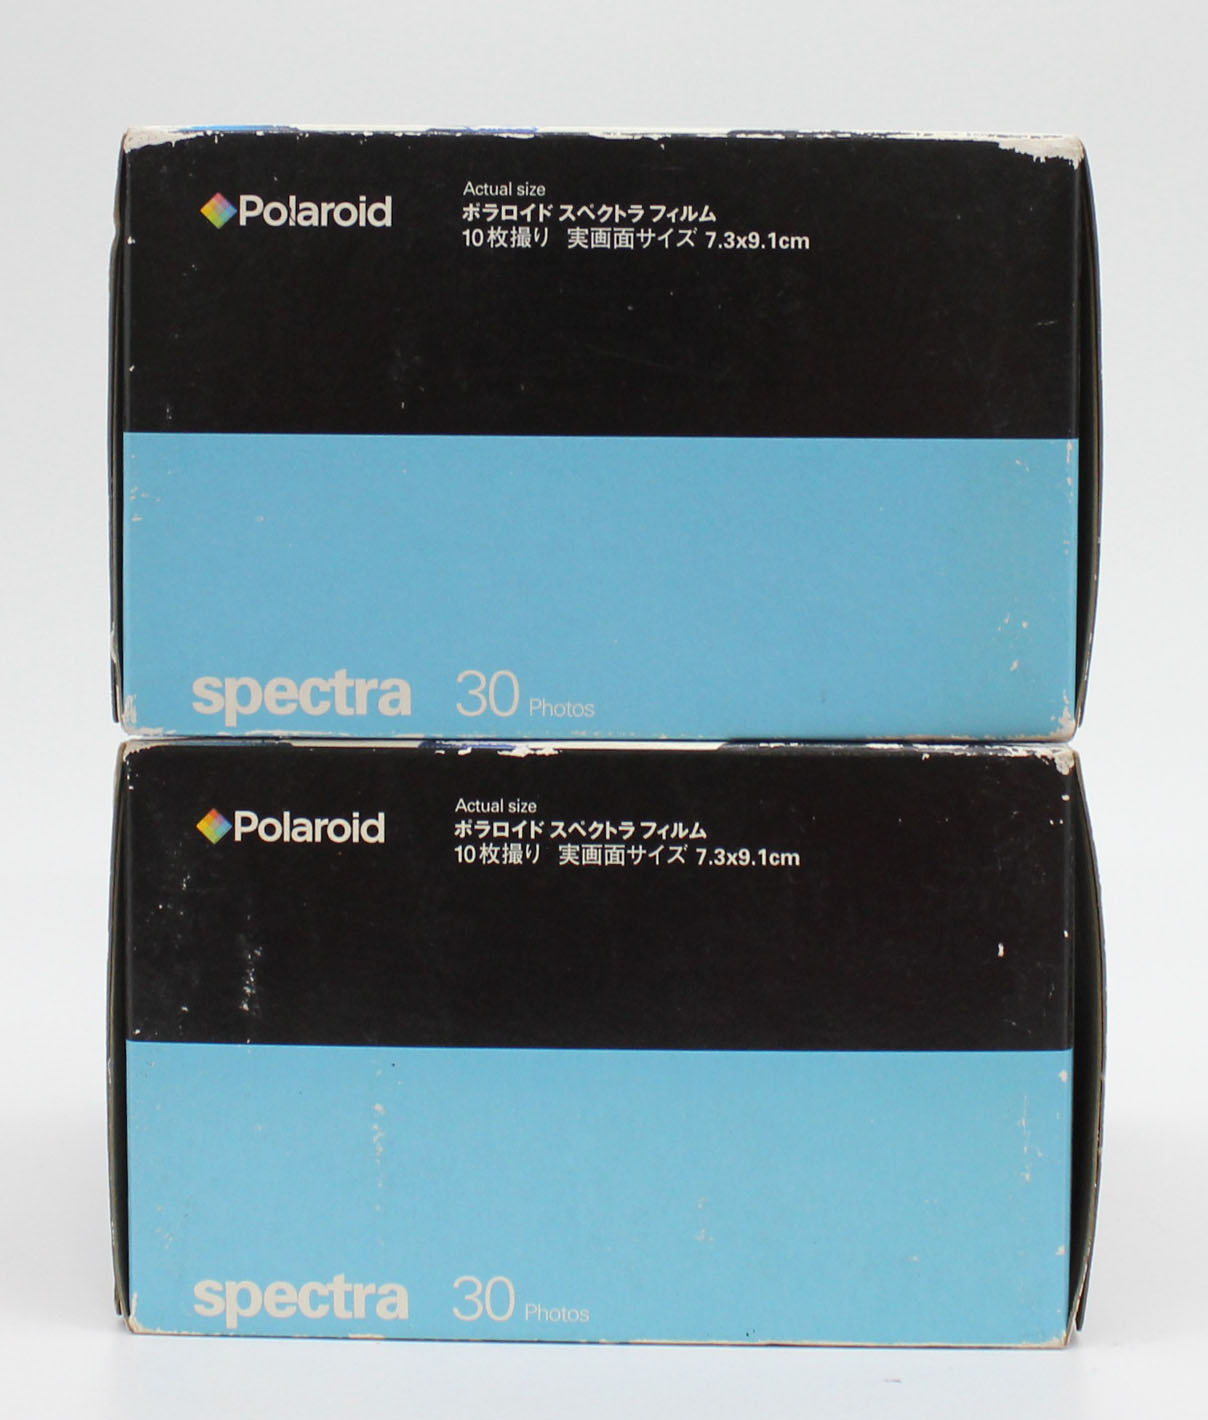  Polaroid 664 spectra Instant Pack Film 30 photos (2 Packs) Expired 01/07 from Japan Photo 3